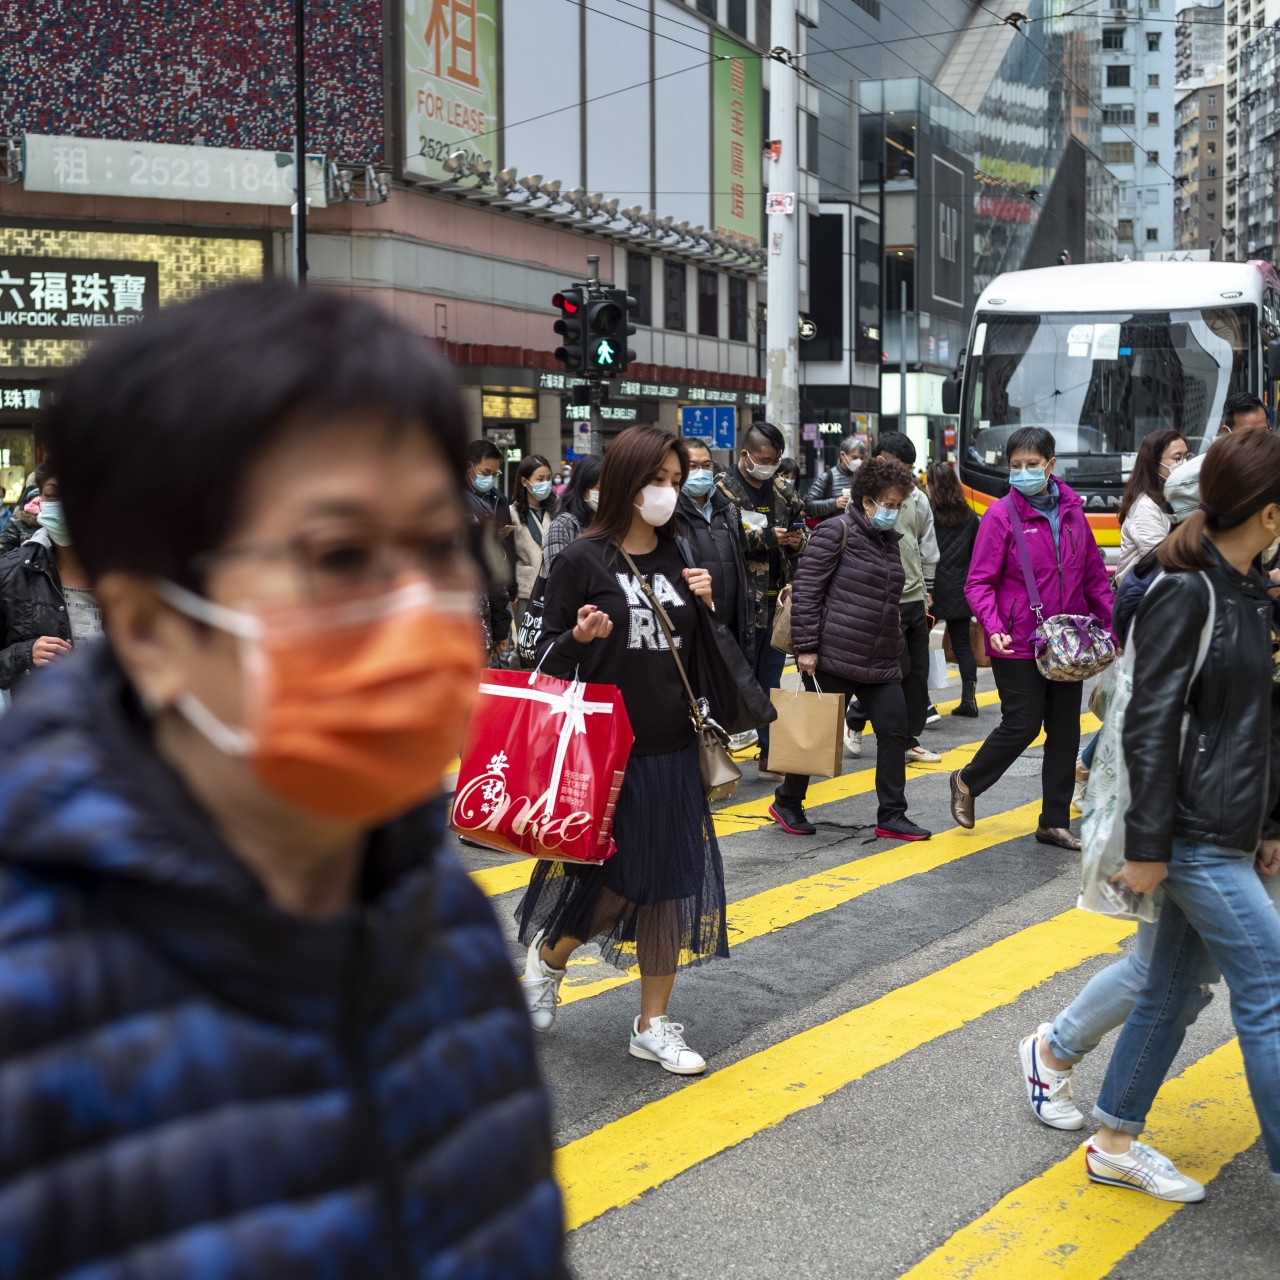 Transmission of the virus within Hong Kong shows the city is in the grip of a community outbreak, says the city’s leading authority on infectious diseases. Photo: Warton Li